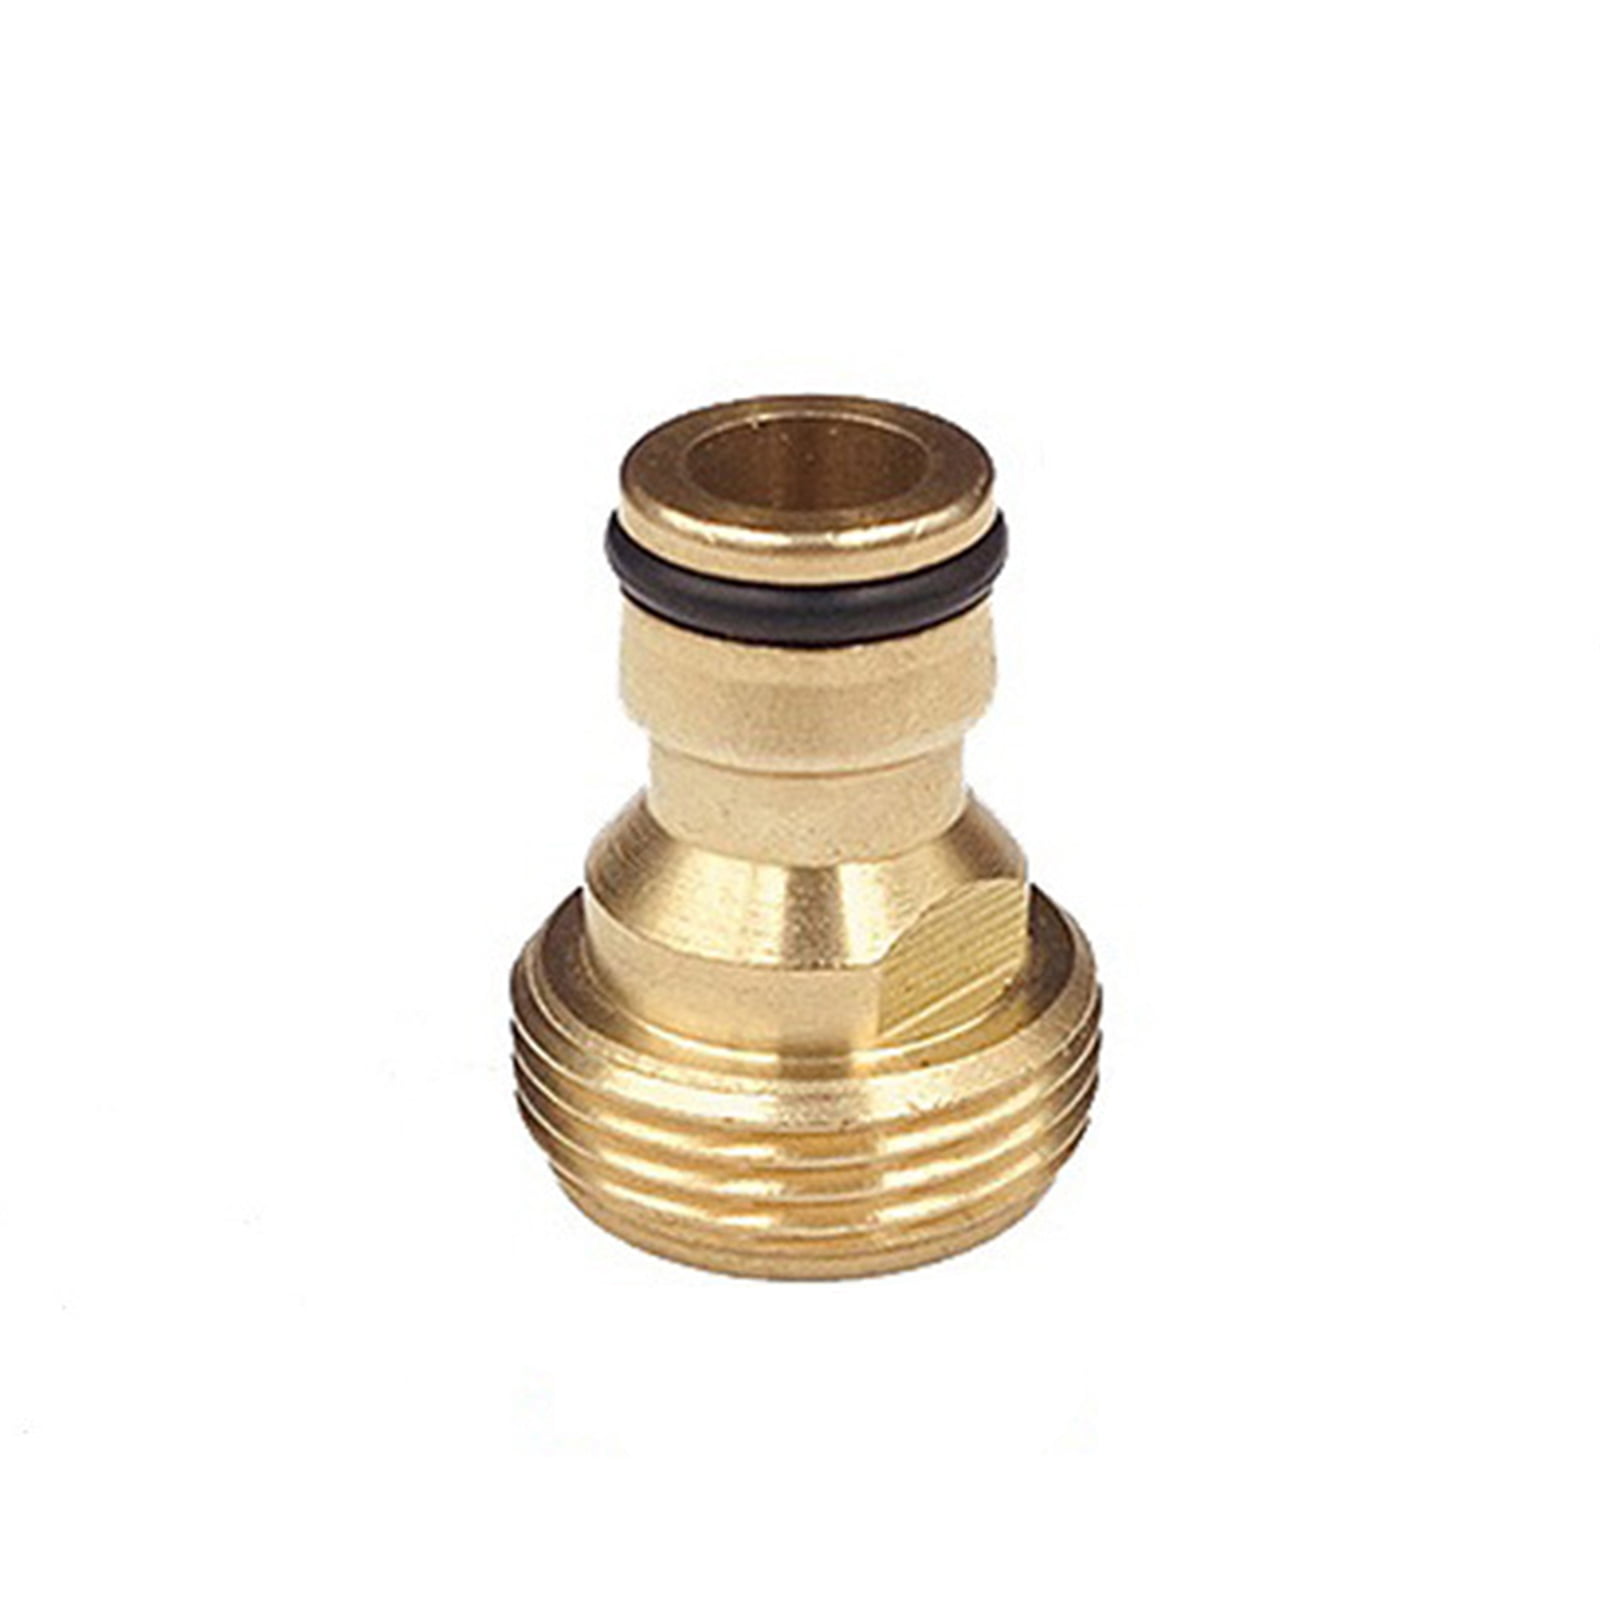 3Pcs Garden Water Hose Pipe Tap Connector Connection Fitting Adapter Hozelock. 